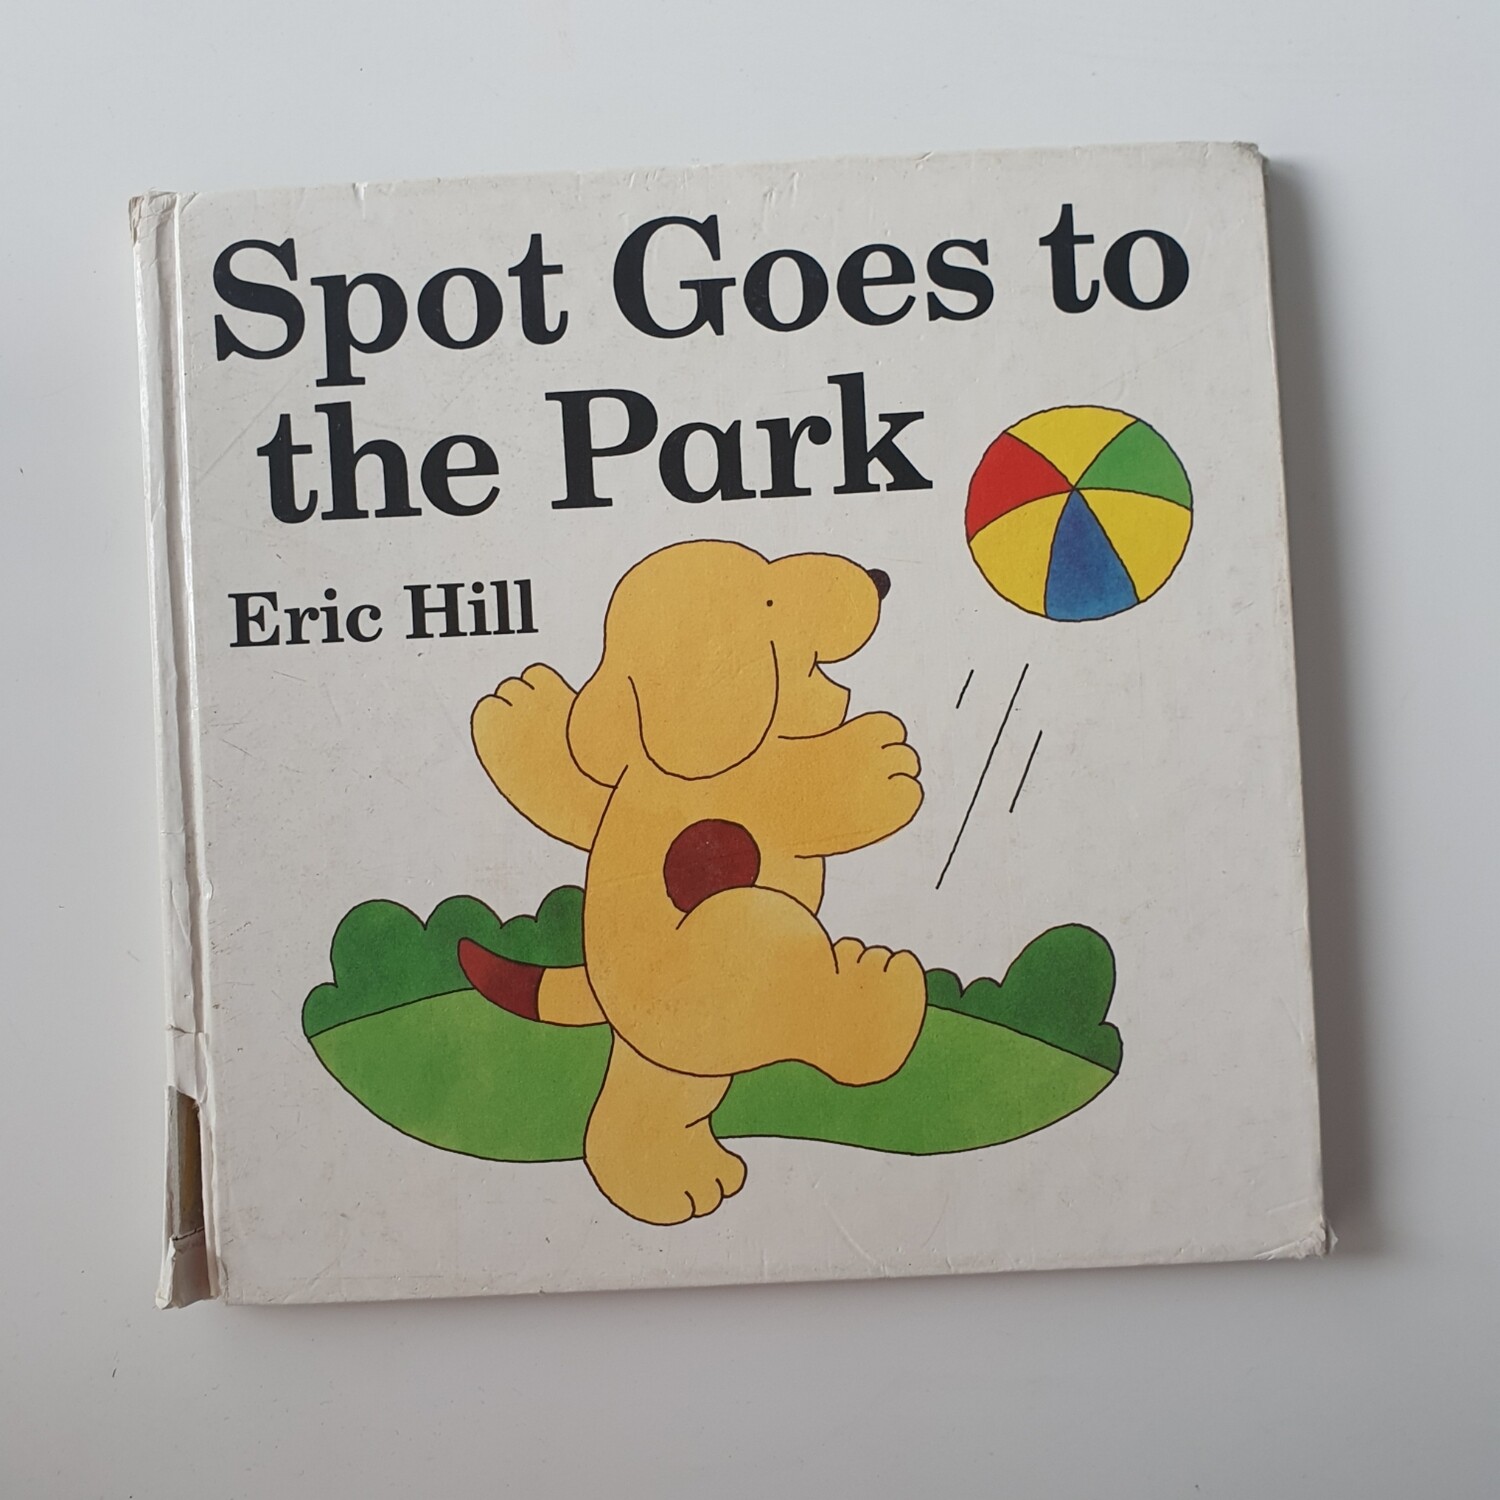 Spot goes to the Park - Spot the Dog